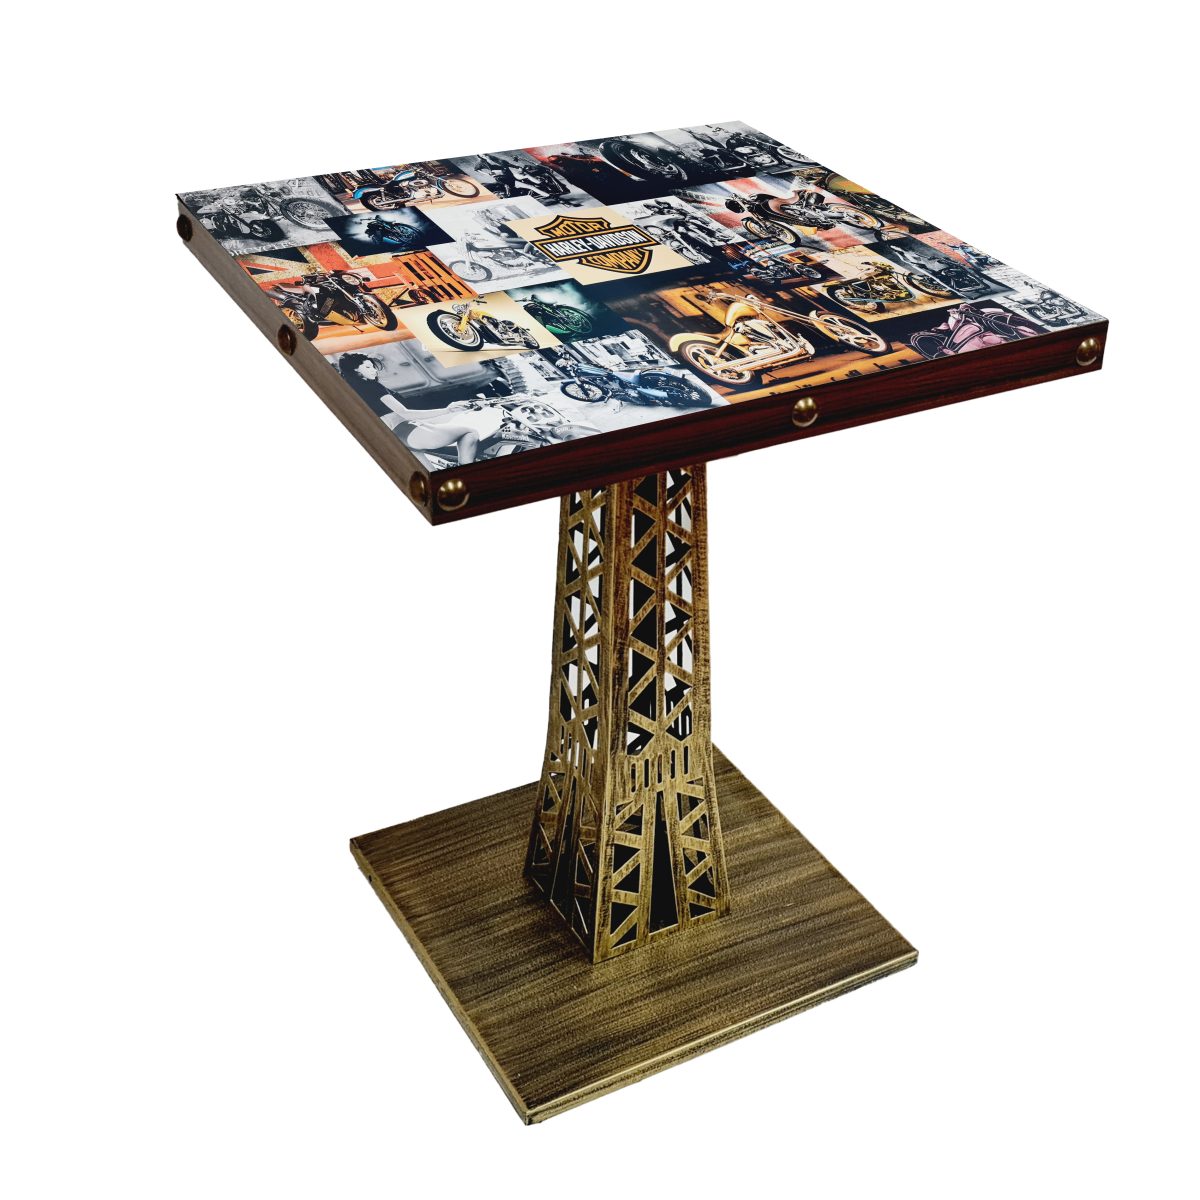 Custom Printed Tables For Bars And Nightclubs